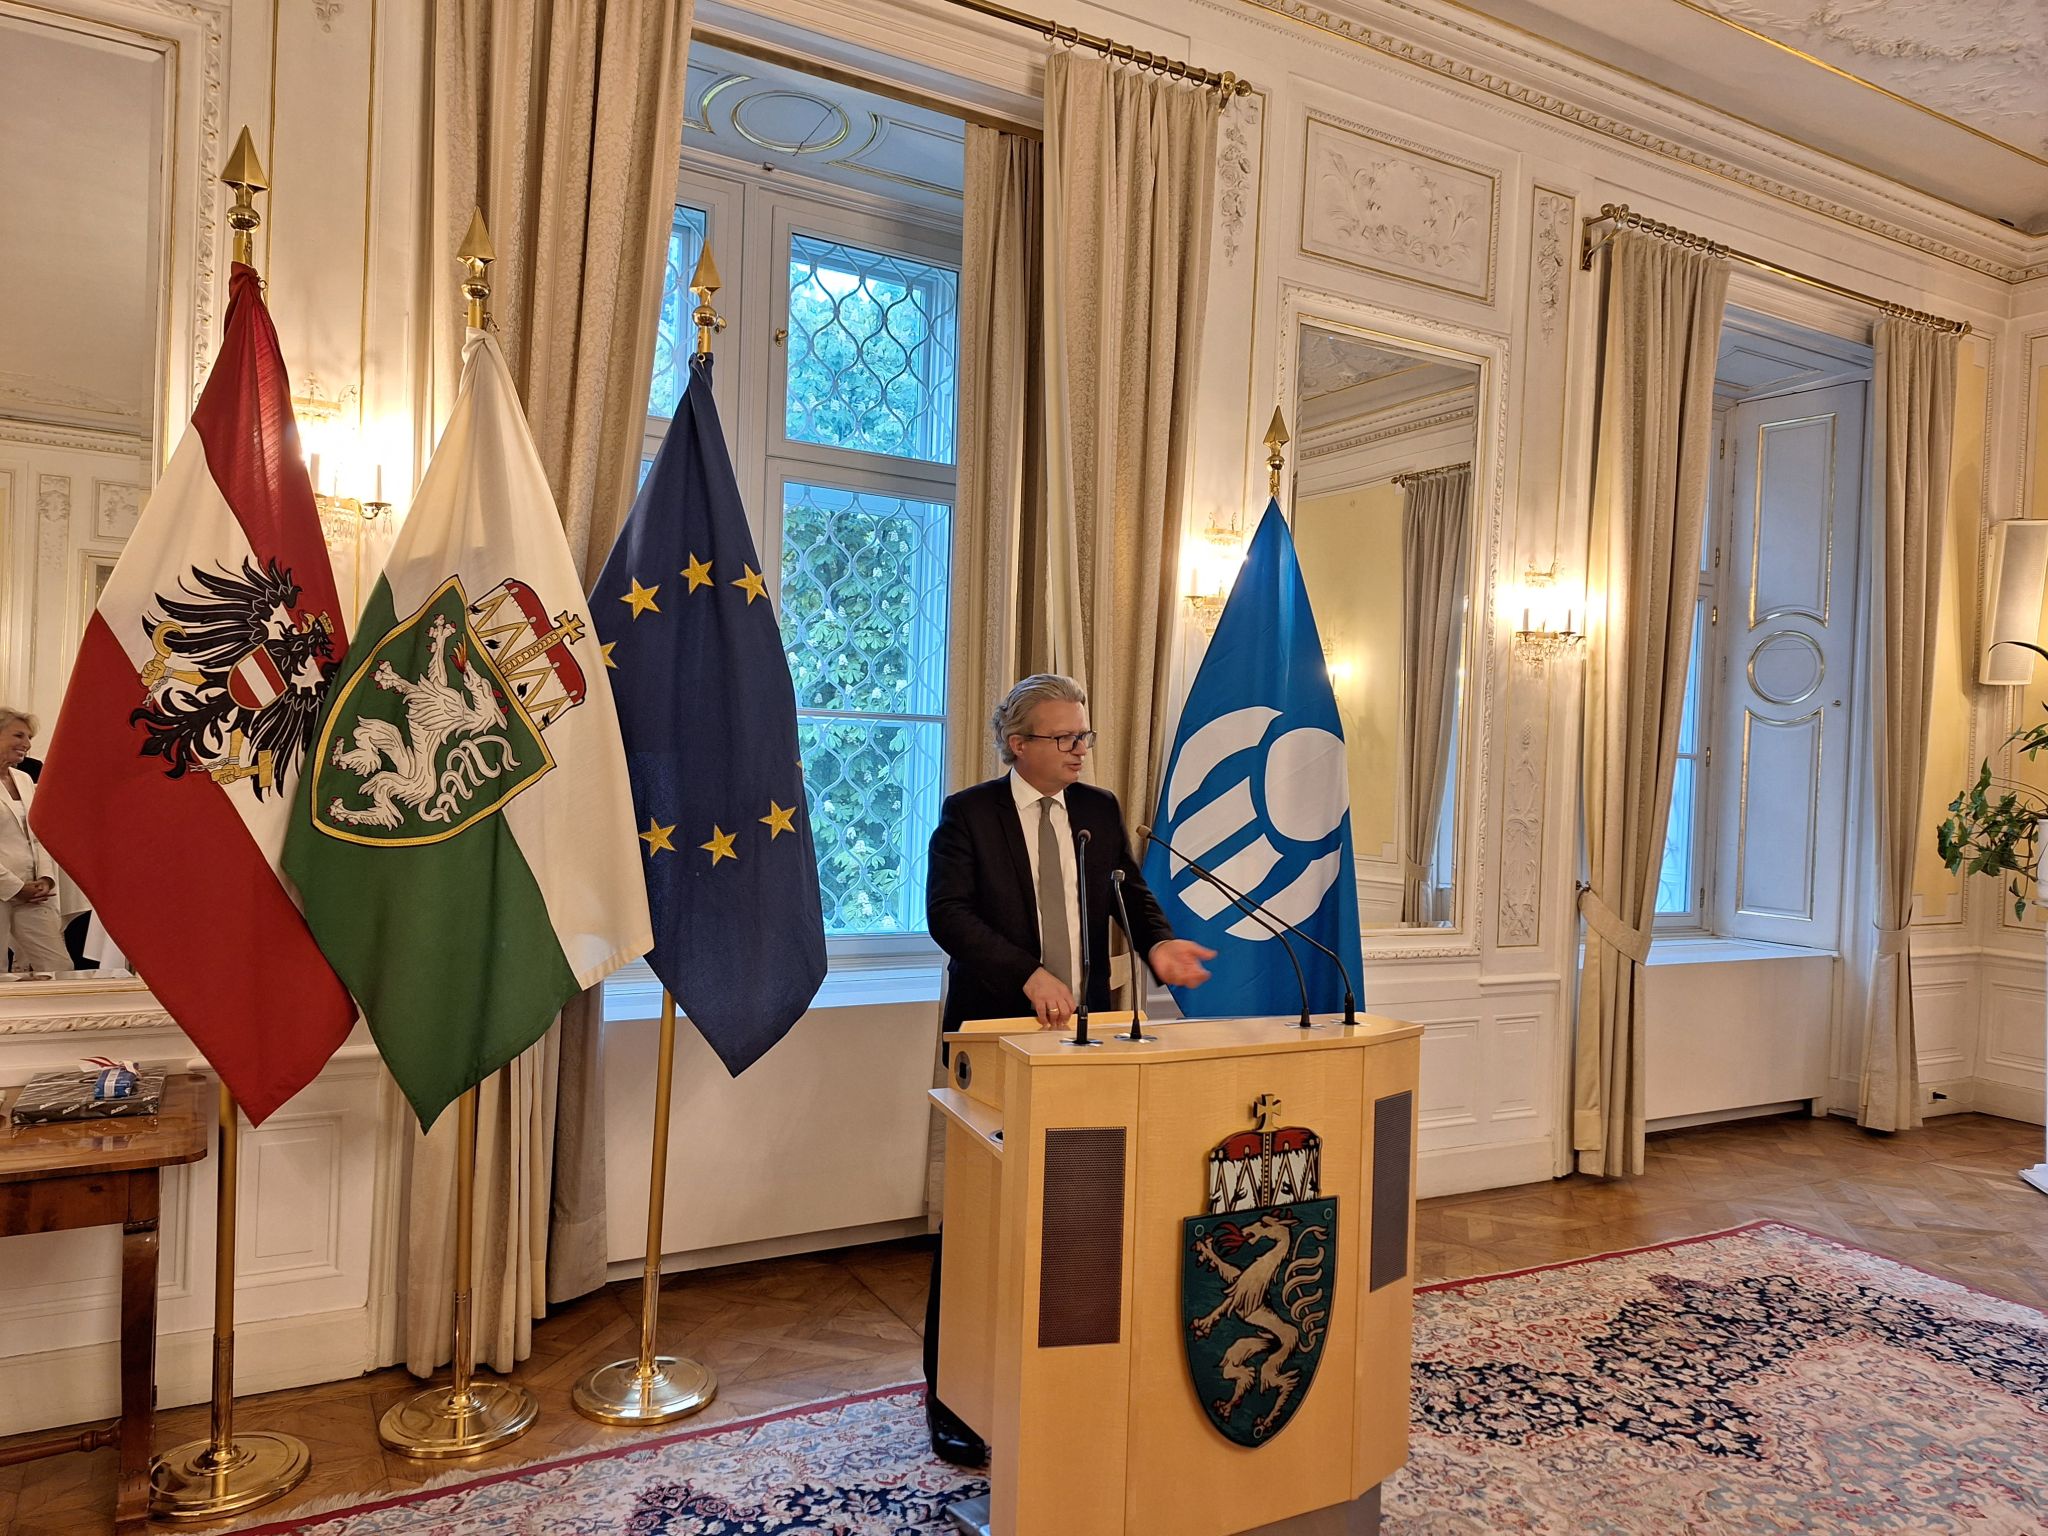 Governor of Styria, His Excellency Mr Christopher Drexler, welcoming guests at the official reception.